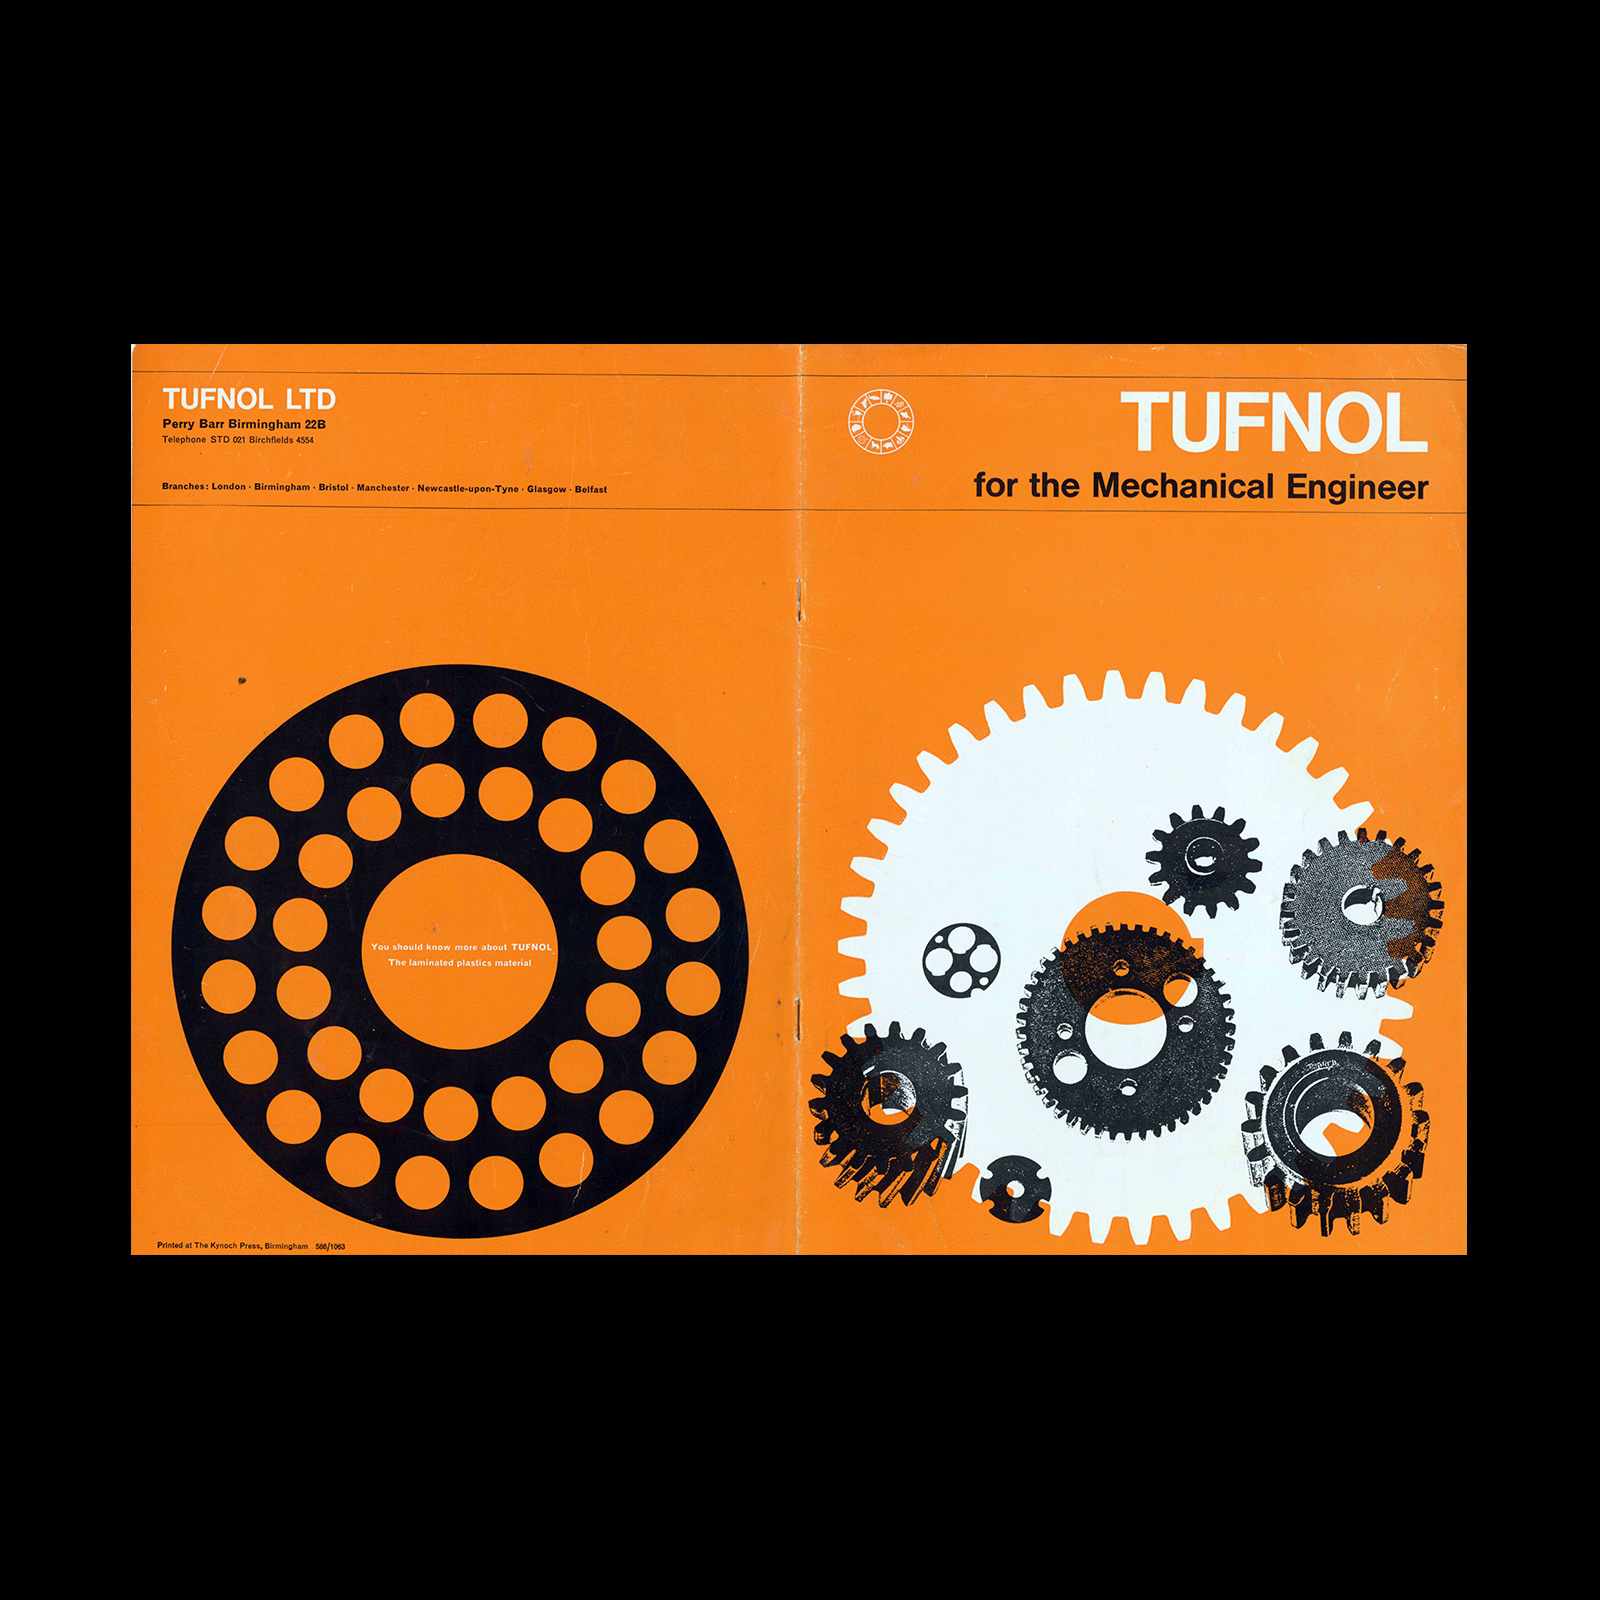 TUFNOL, For the Mechanical Engineer, Brochure, 1960s. Design and print by The Kynoch Press